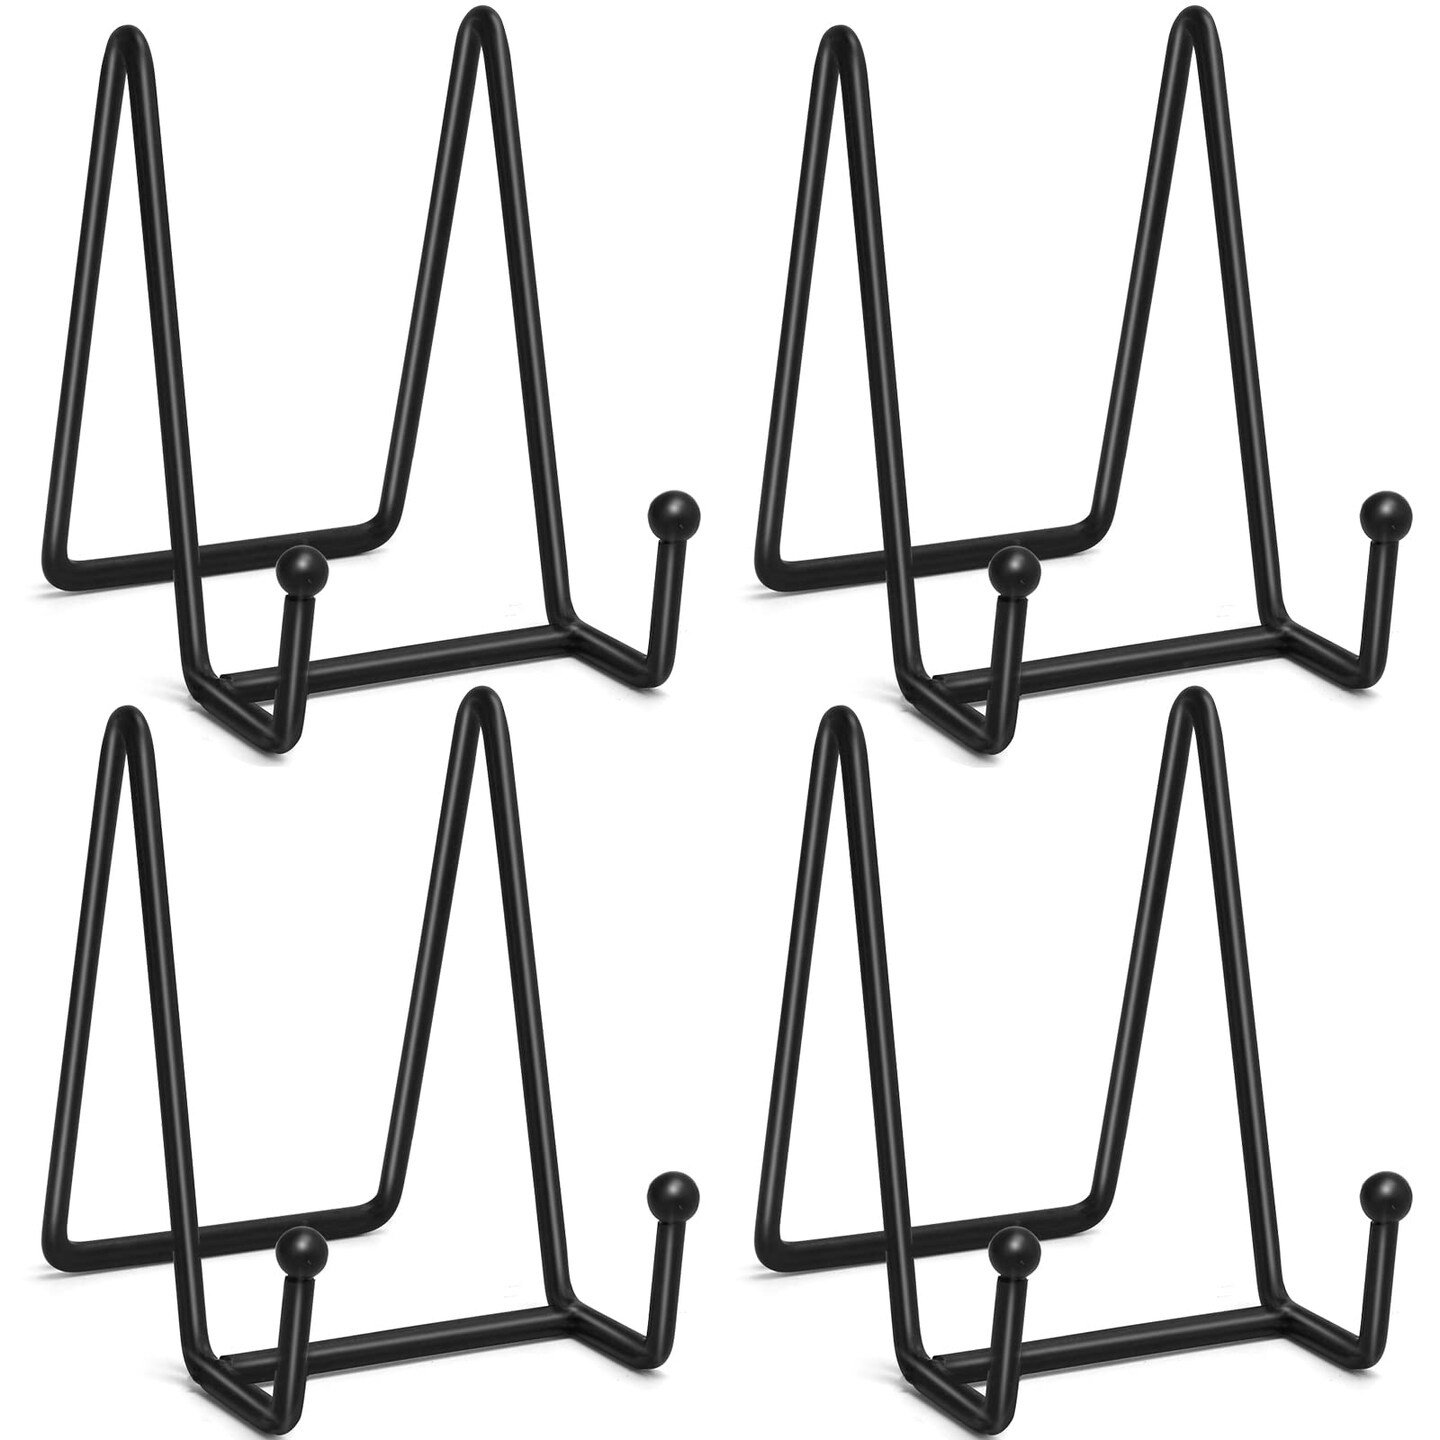 Ouskr Plate Stands for Display, 4 Pcs 4-1/4 Inch Plate Holder Display Stand, Metal Iron Picture Frame Holders Stand for Book Photo Small Easels Plaque Dish Art Tabletop Decorative Black